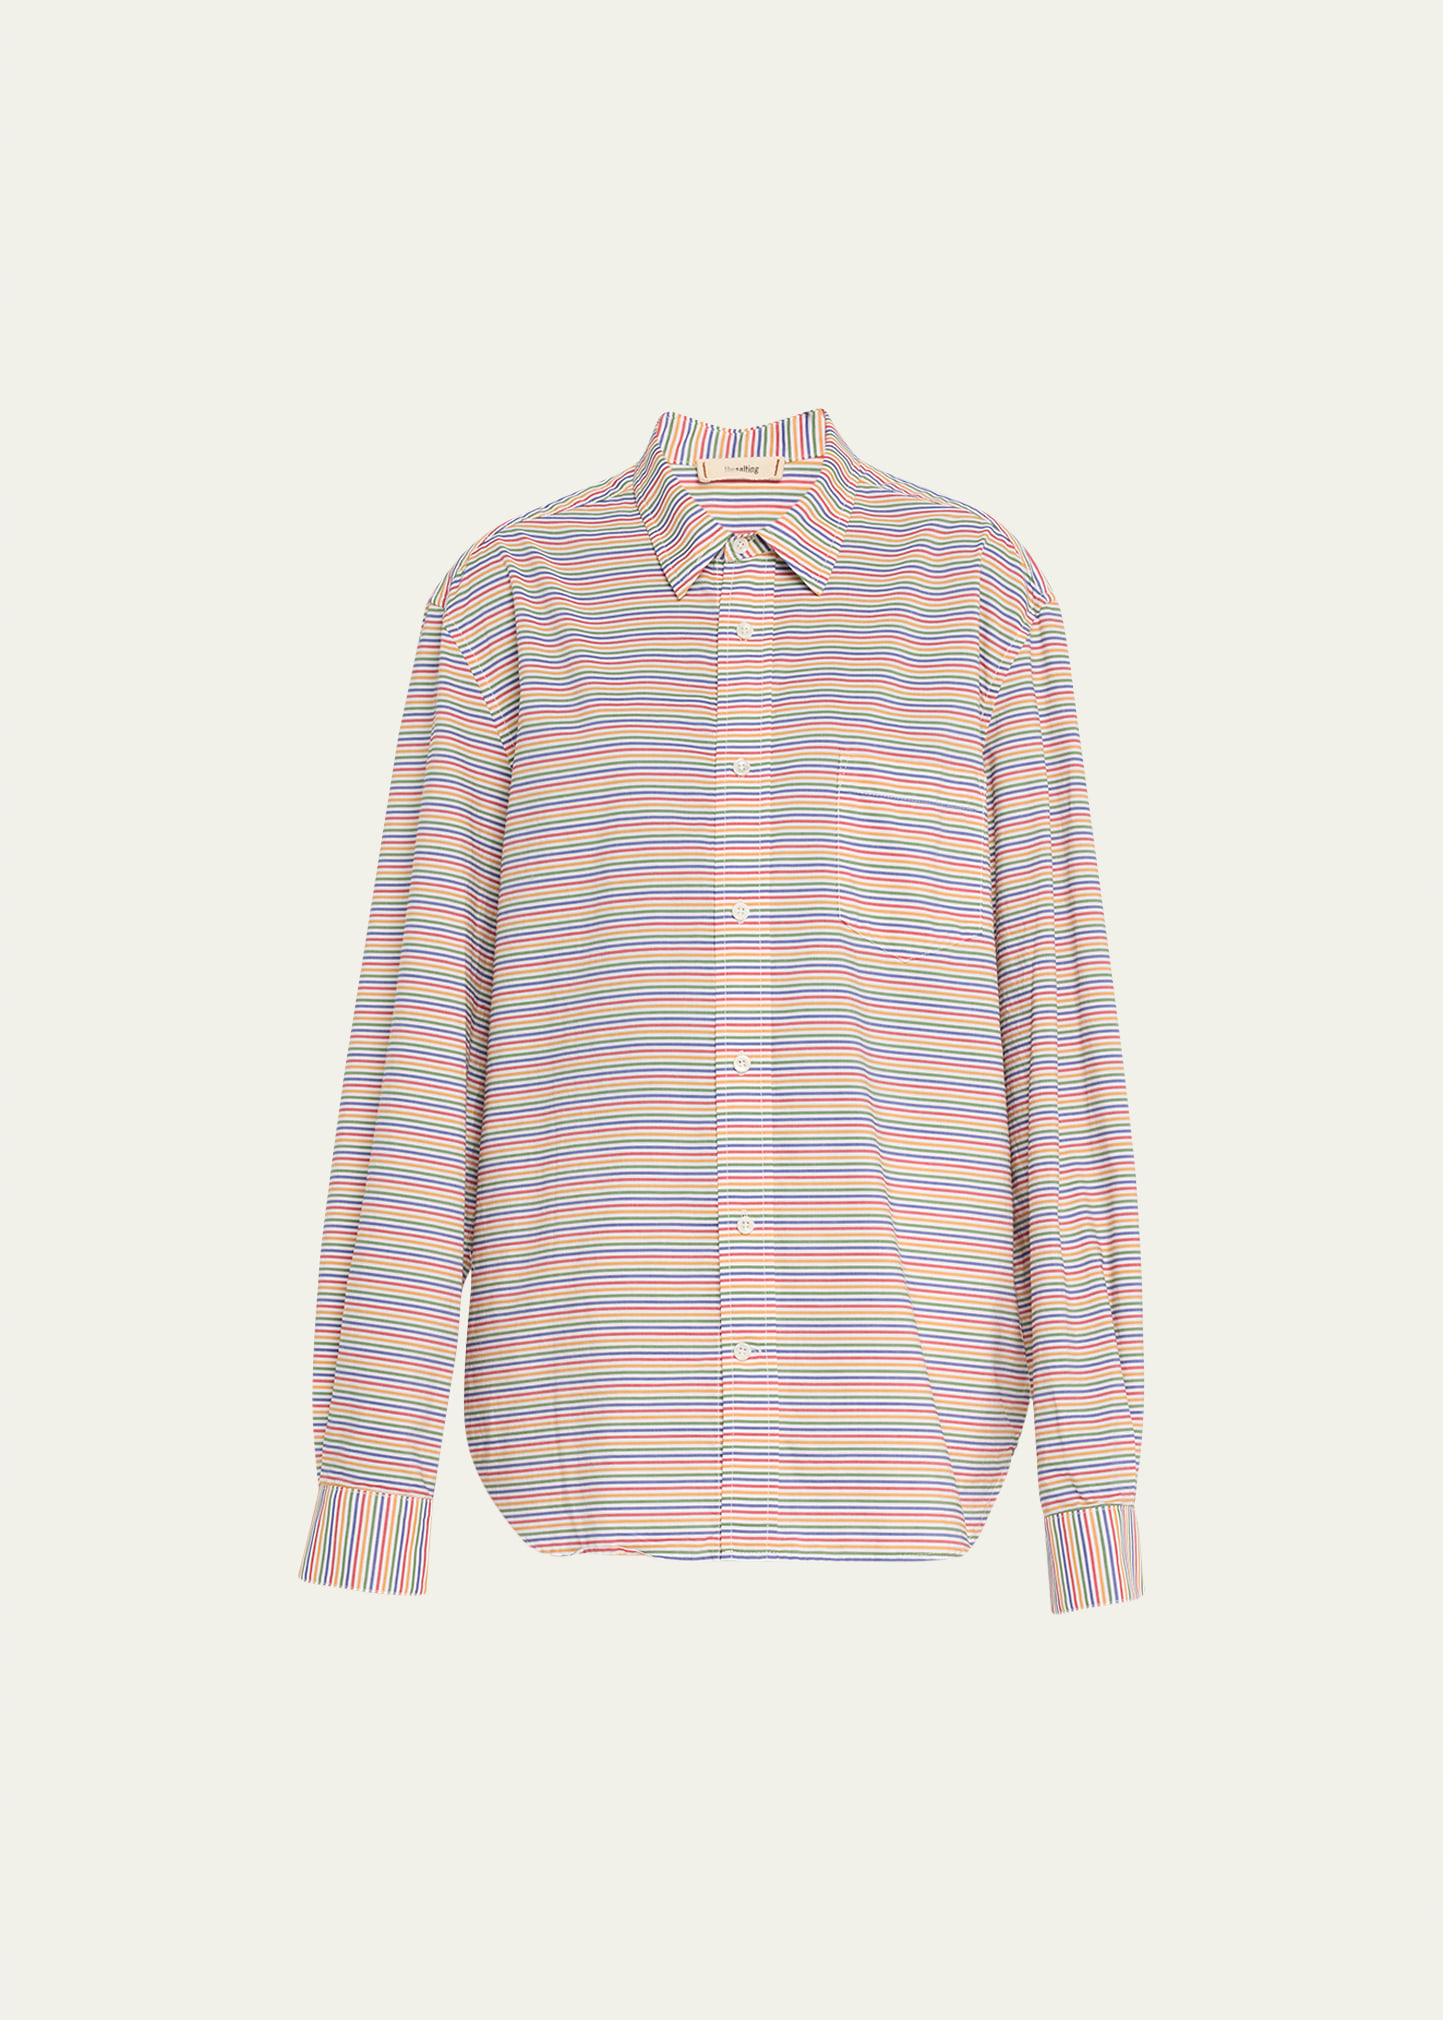 The Salting Classic Striped Cotton Shirt In Rainbow Stripe